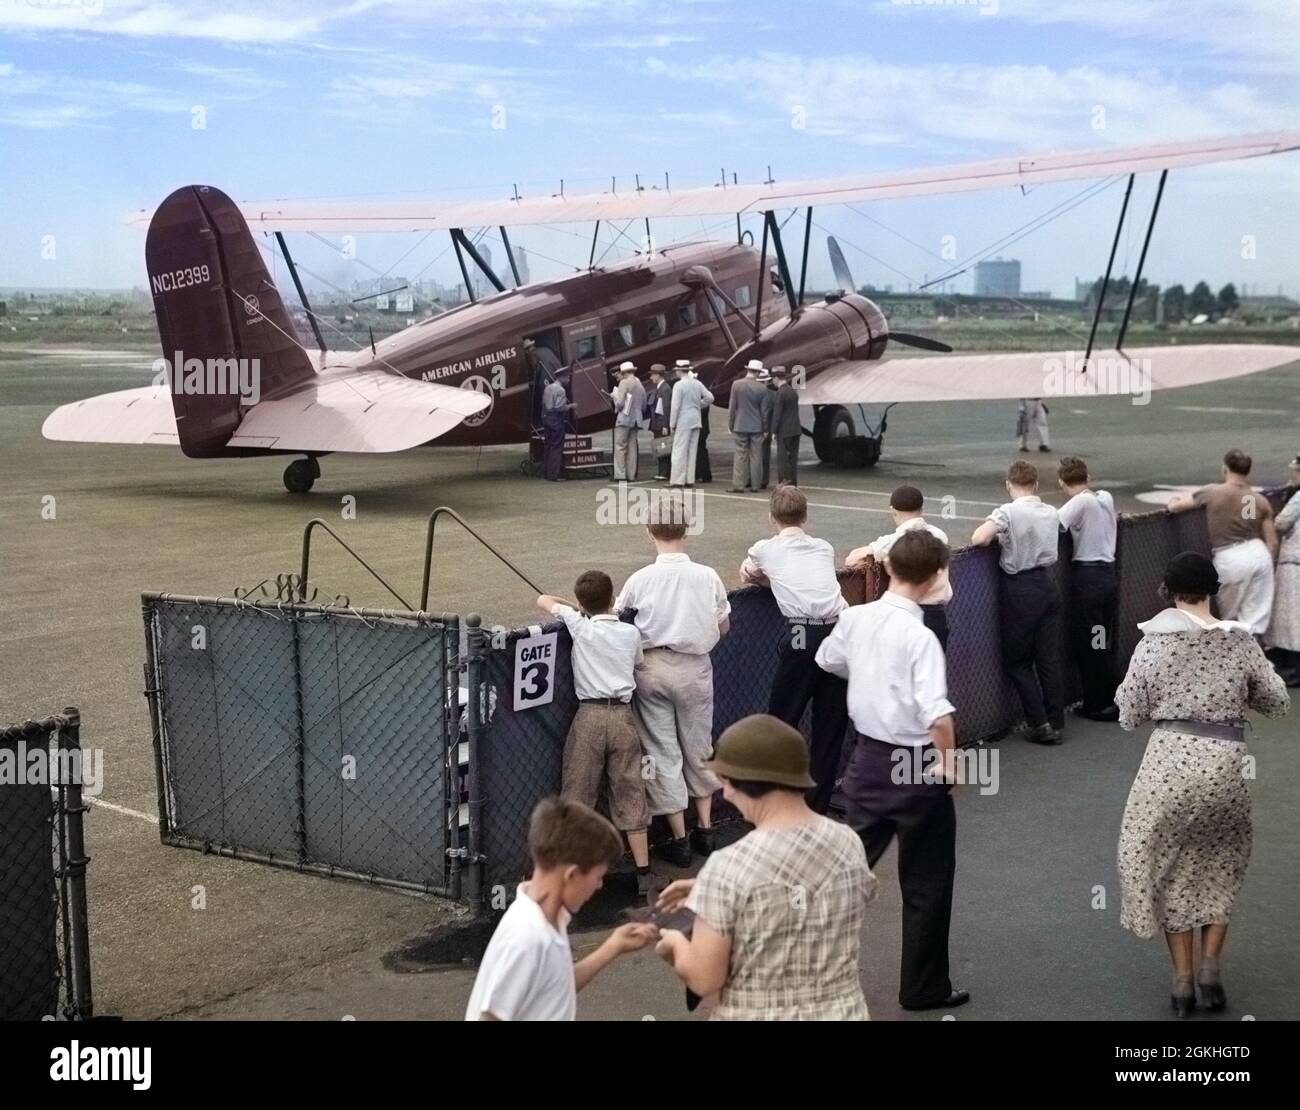 1930s PASSENGERS BOARDING AMERICAN AIRLINES CONDOR BIPLANE AIRPLANE FOR COMMERCIAL FLIGHT FROM NEWARK NEW JERSEY USA AIRPORT - q74752c CPC001 HARS NORTH AMERICAN PRETEEN BOY URBAN CENTER ADVENTURE CUSTOMER SERVICE EXCITEMENT NORTHEAST AIRLINES AVIATION NJ OCCUPATIONS MID-ATLANTIC REGION EAST COAST NEWARK MOBILITY NEW JERSEY CONDOR COMMERCIAL AVIATION CURTIS T-32 CONDOR LOADING GATE PRE-TEEN PRE-TEEN BOY 1934 BIPLANE CAUCASIAN ETHNICITY OLD FASHIONED Stock Photo